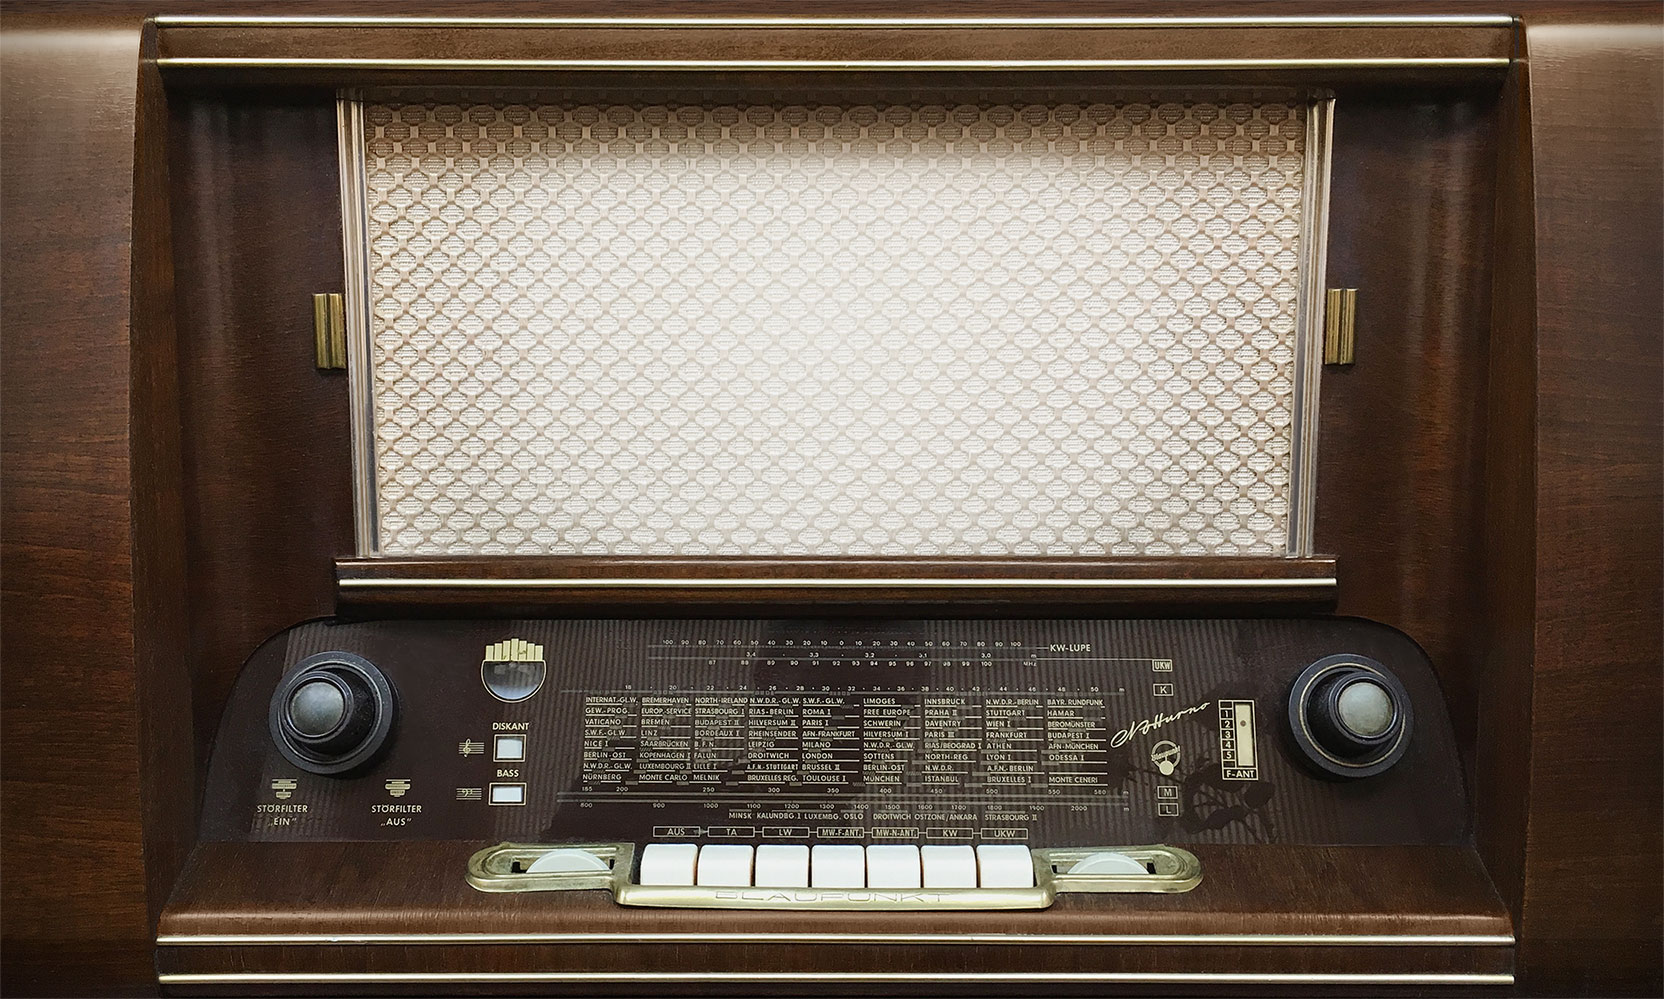 Photograph of an old radio